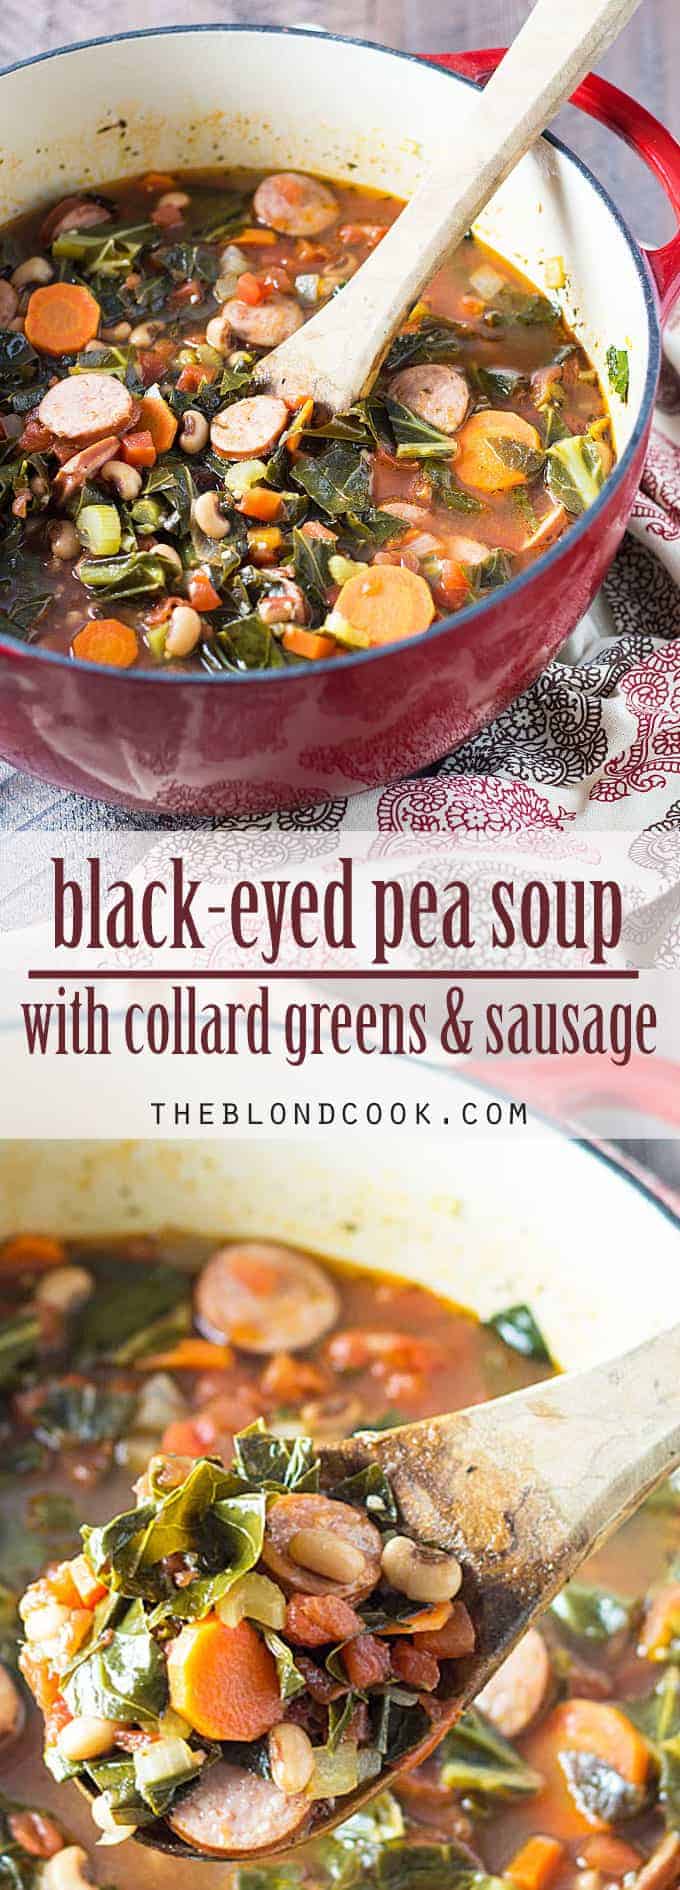 Black-Eyed Pea Soup with Collard Greens and Sausage -- an easy one pot meal for New Year's Day!